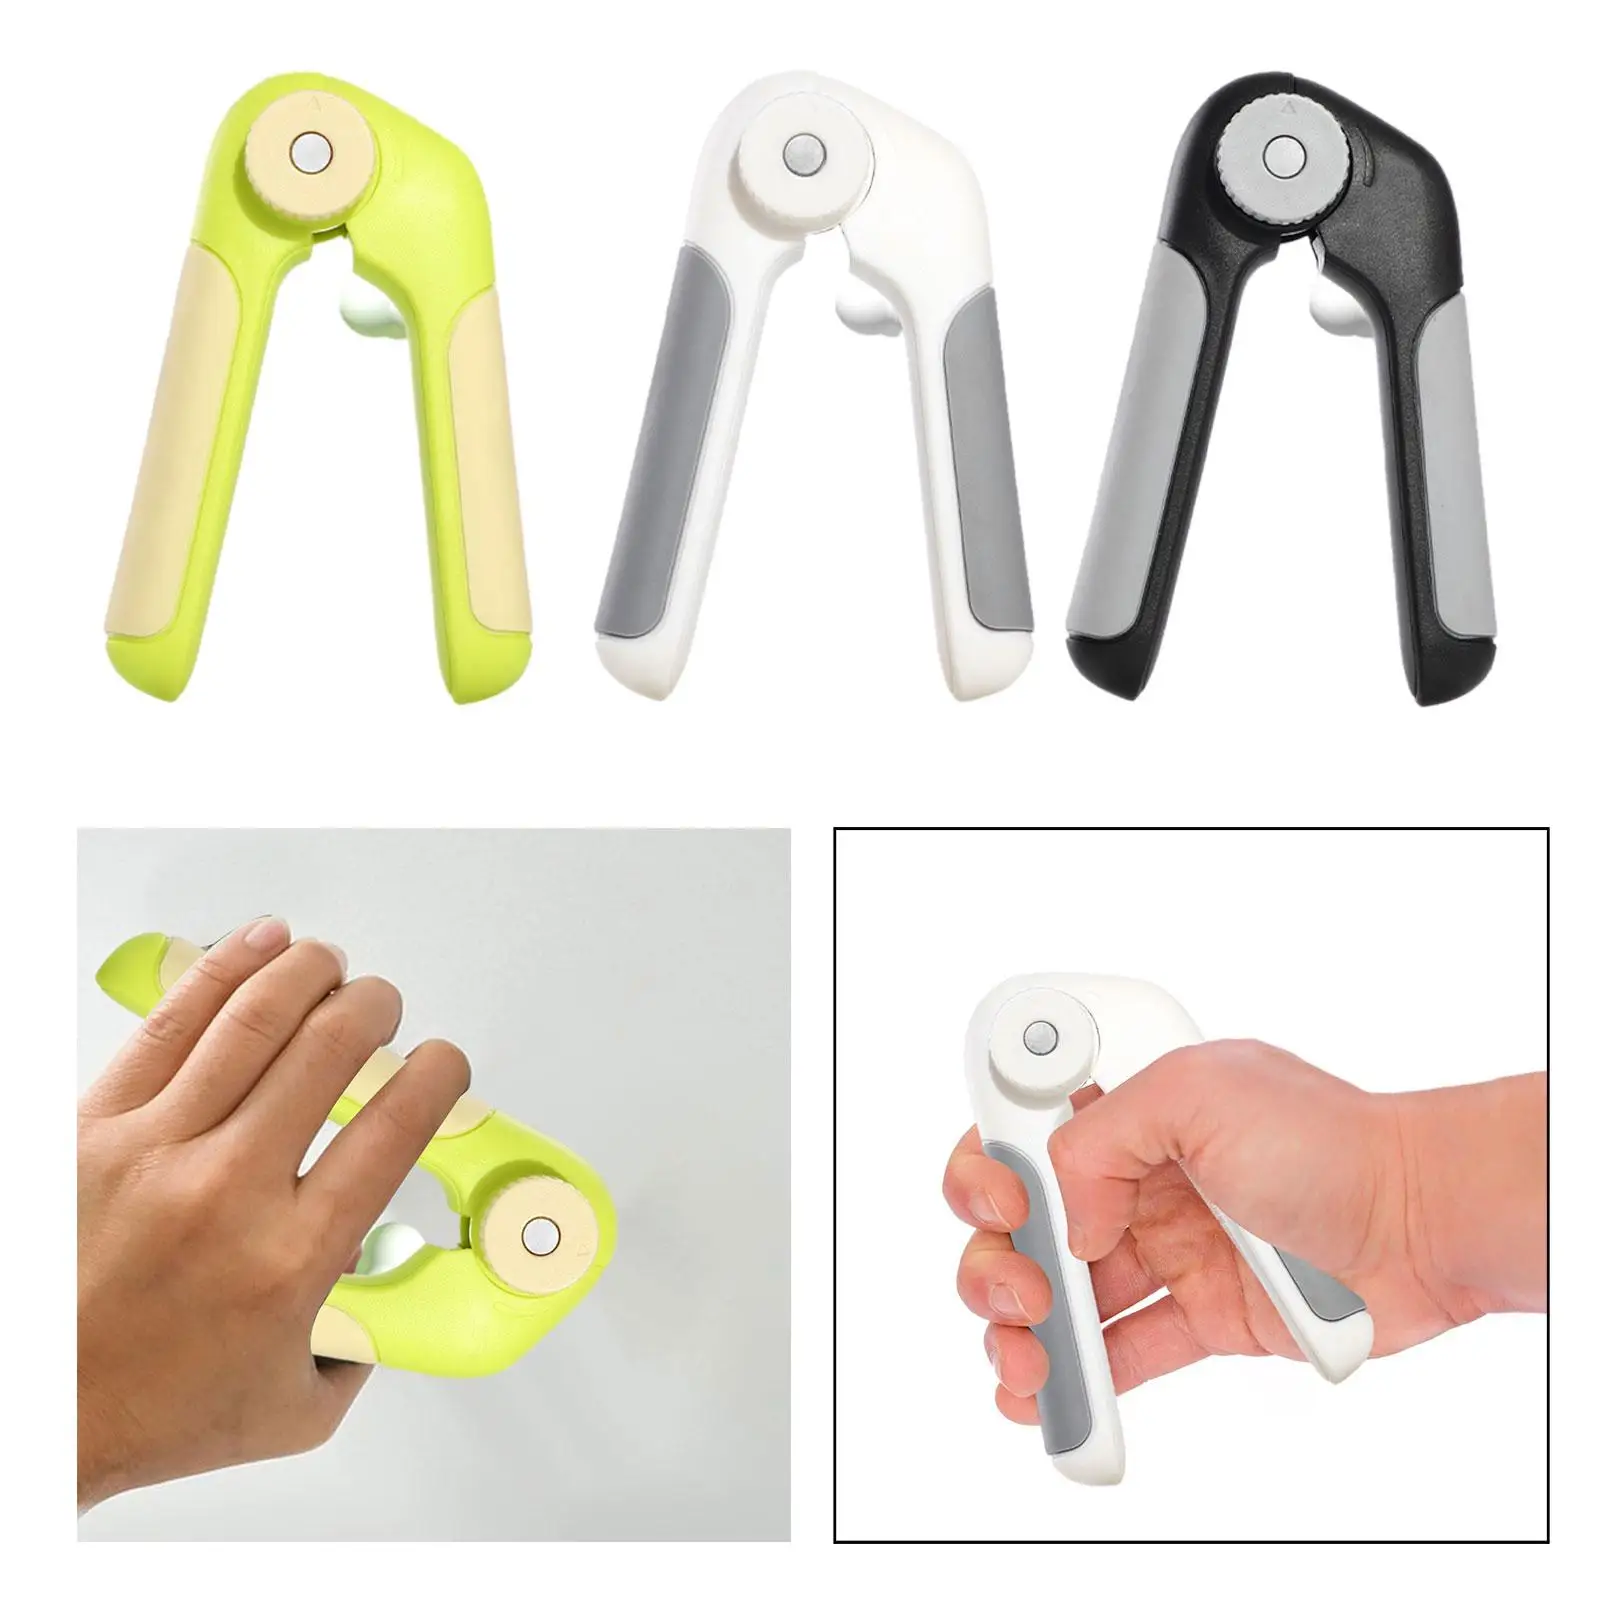 Hand Grip Strengthener Hand Exercises Wrist and Forearm Strength Trainer for Seniors Musician Athletes Piano Player Women Men